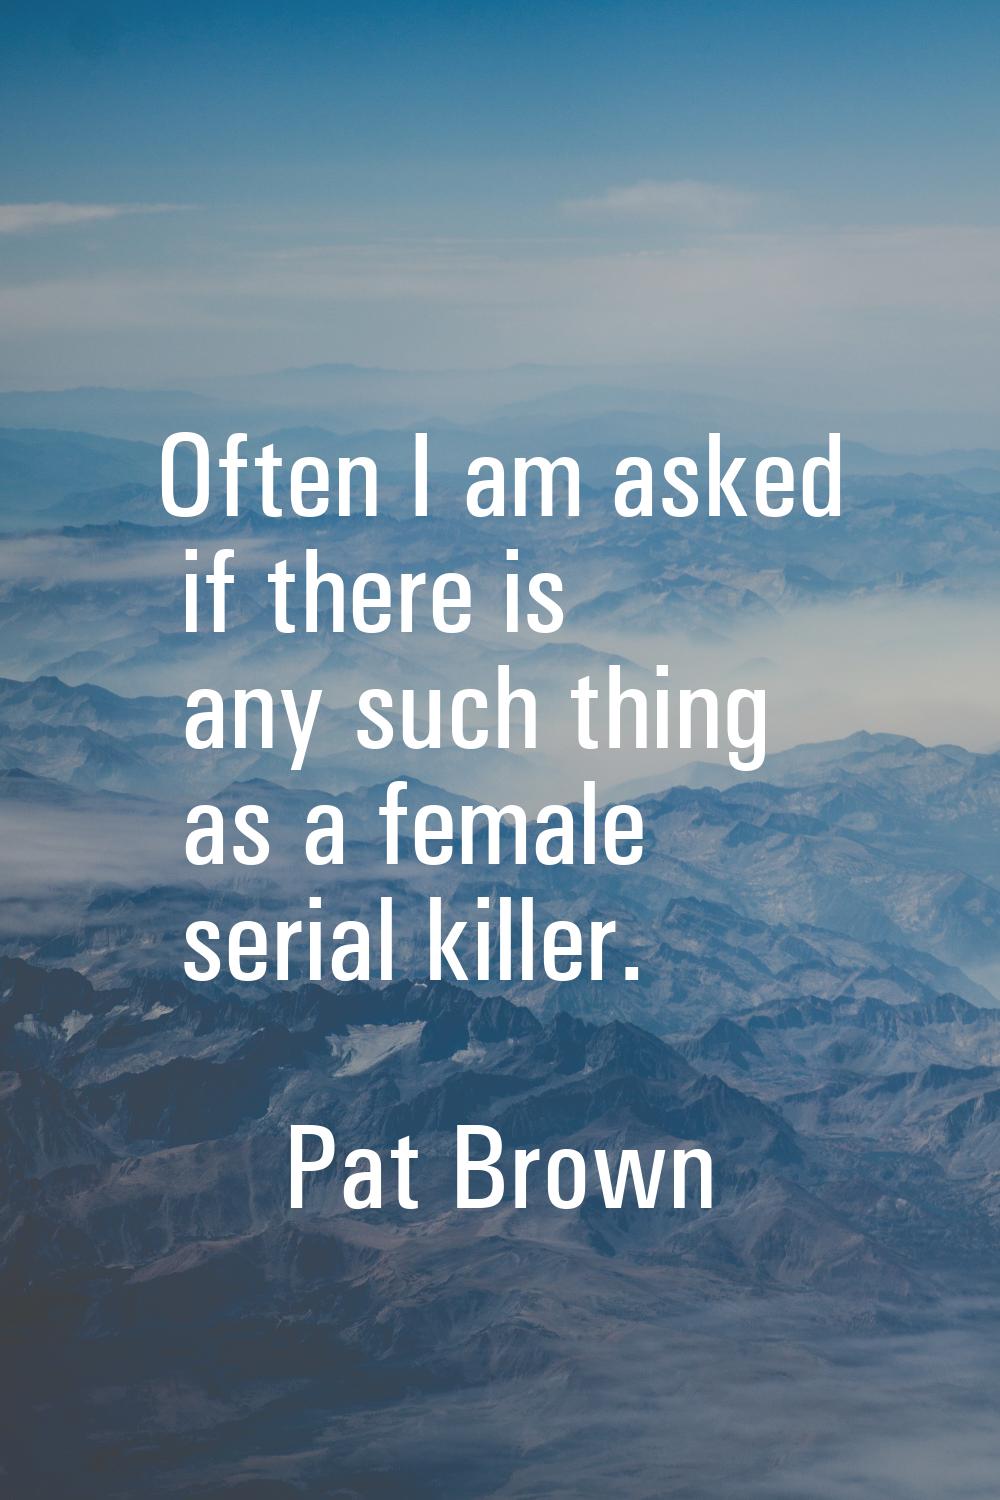 Often I am asked if there is any such thing as a female serial killer.